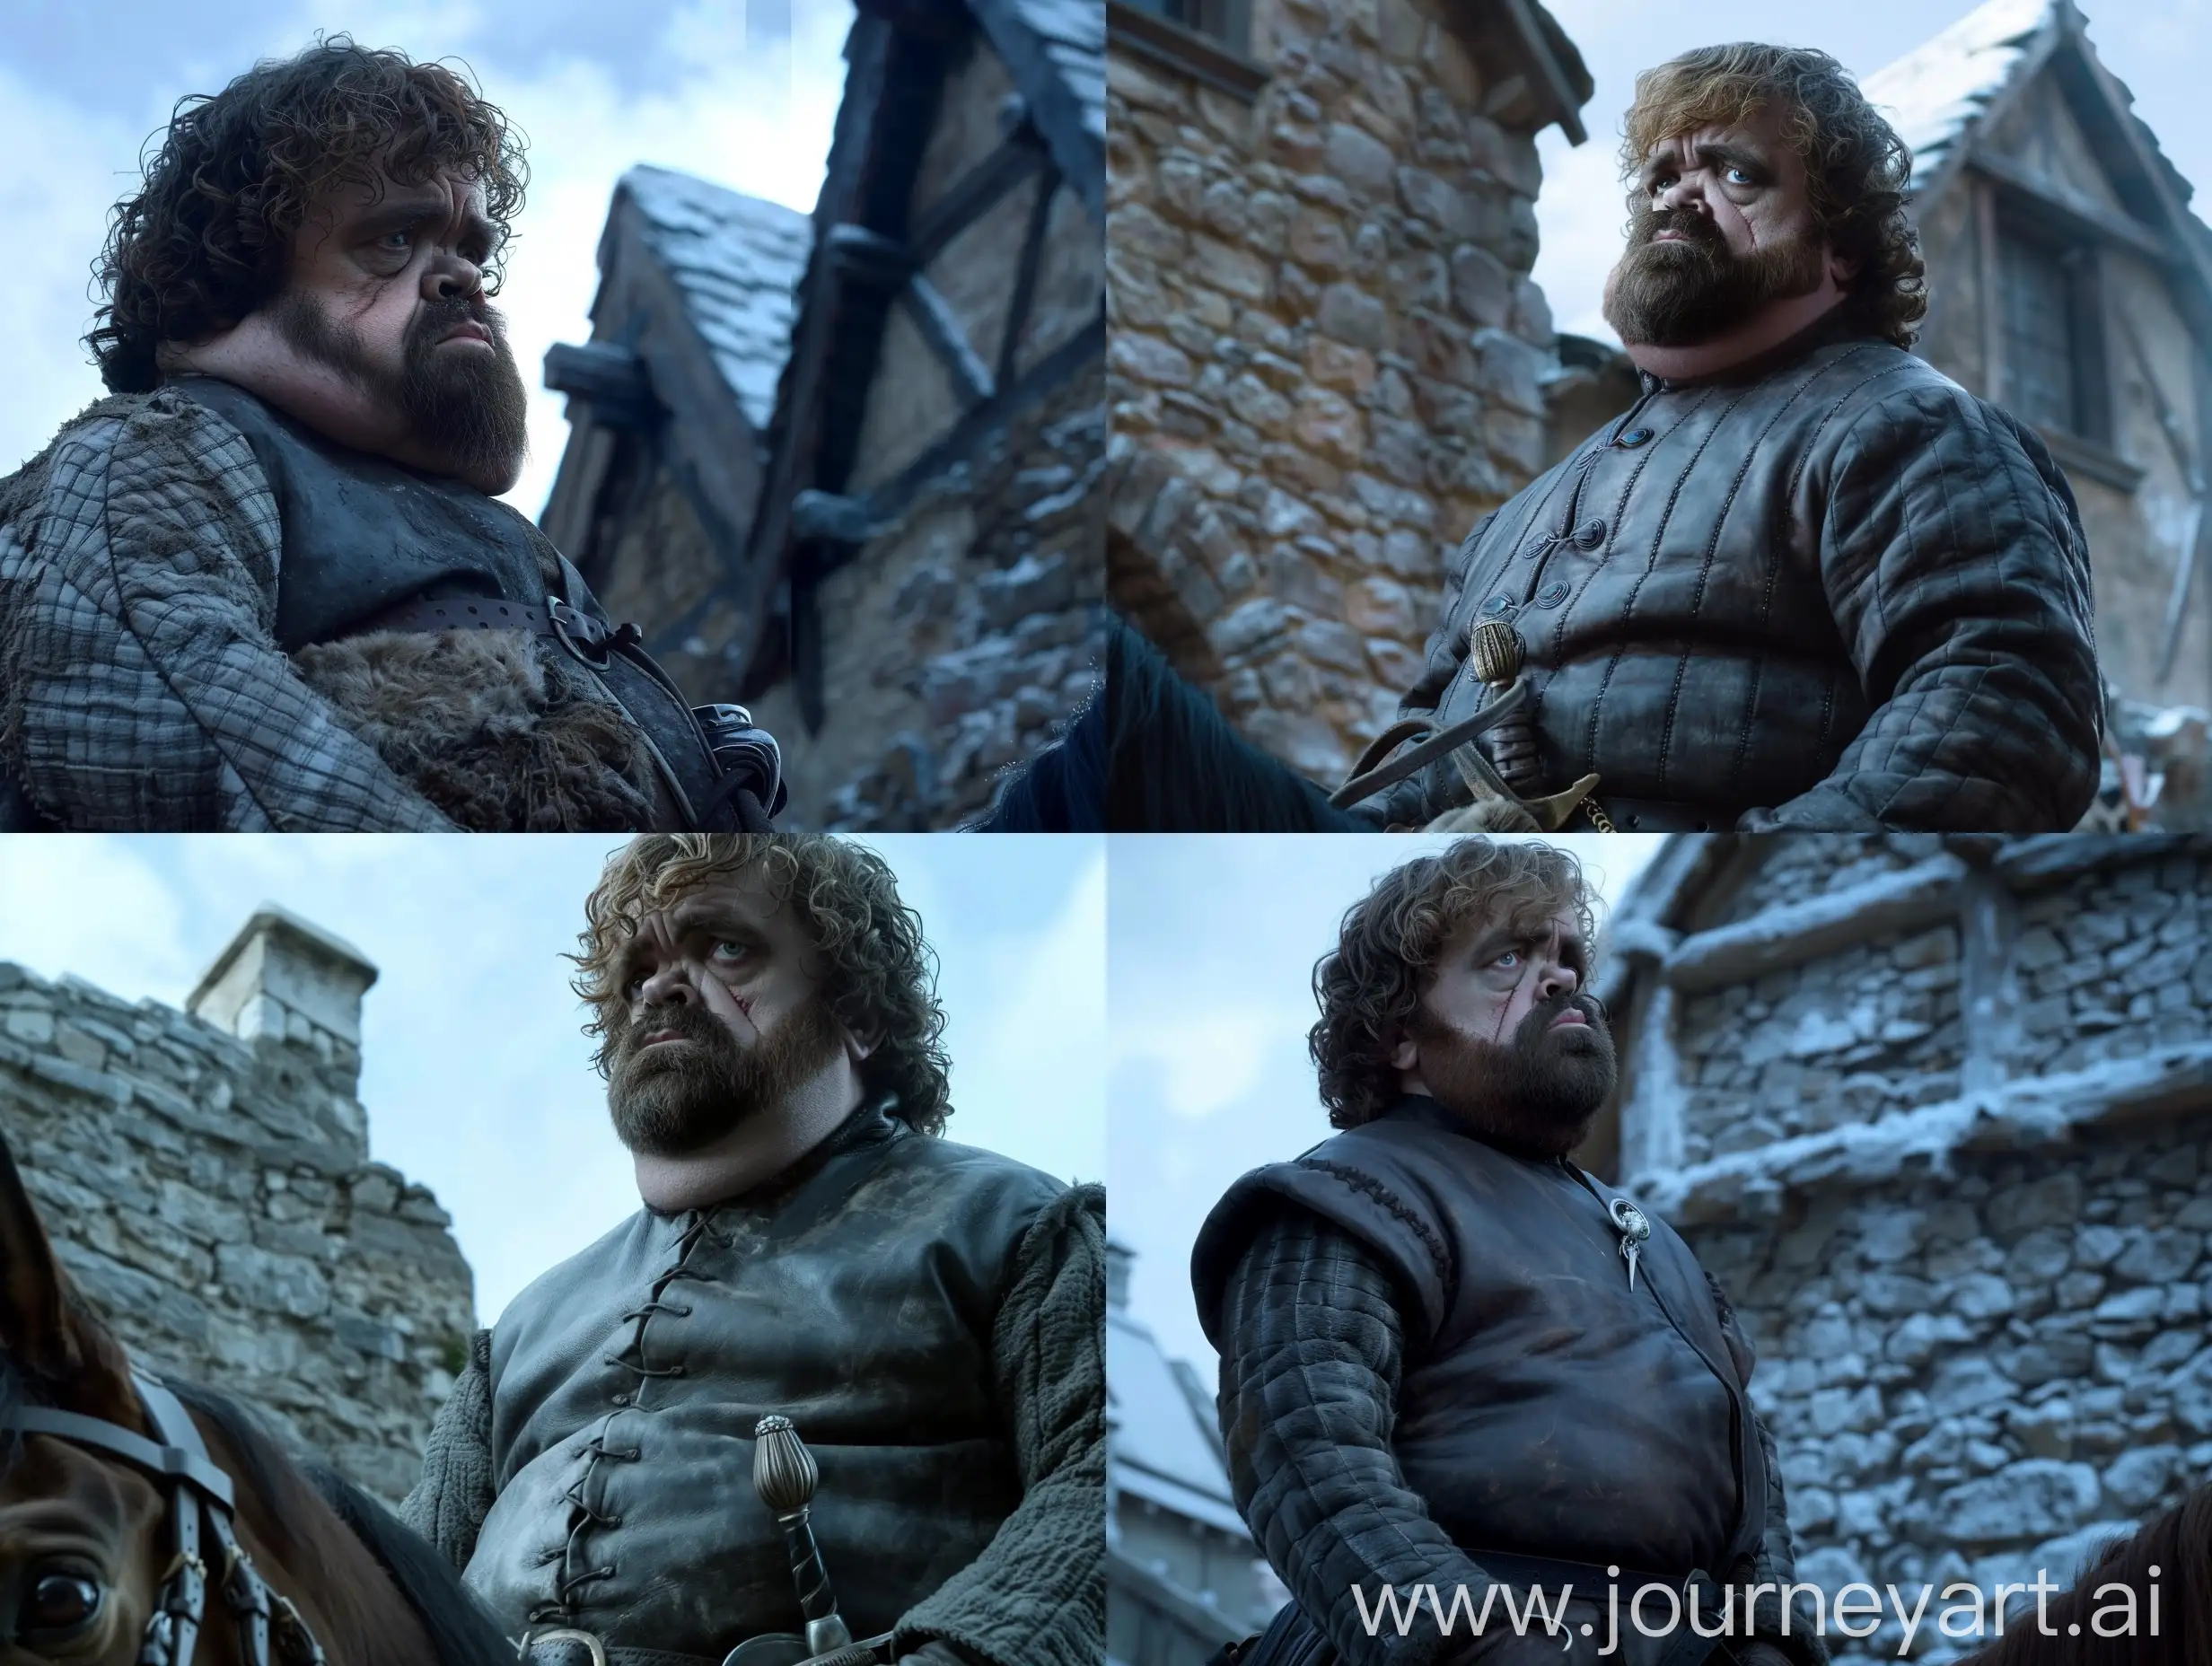 Tyrion Lannister in Game of Thrones series, Tyrion Lannister is very fat, Tyrion Lannister's face and body is very fat, Tyrion Lannister tries to ride his horse. The camera pans Tyrion Lannister from the side, emphasizing his enlarged frame, the background is Winterfell, the style of The Witcher, the lighting is classic, realistic, clear, q2